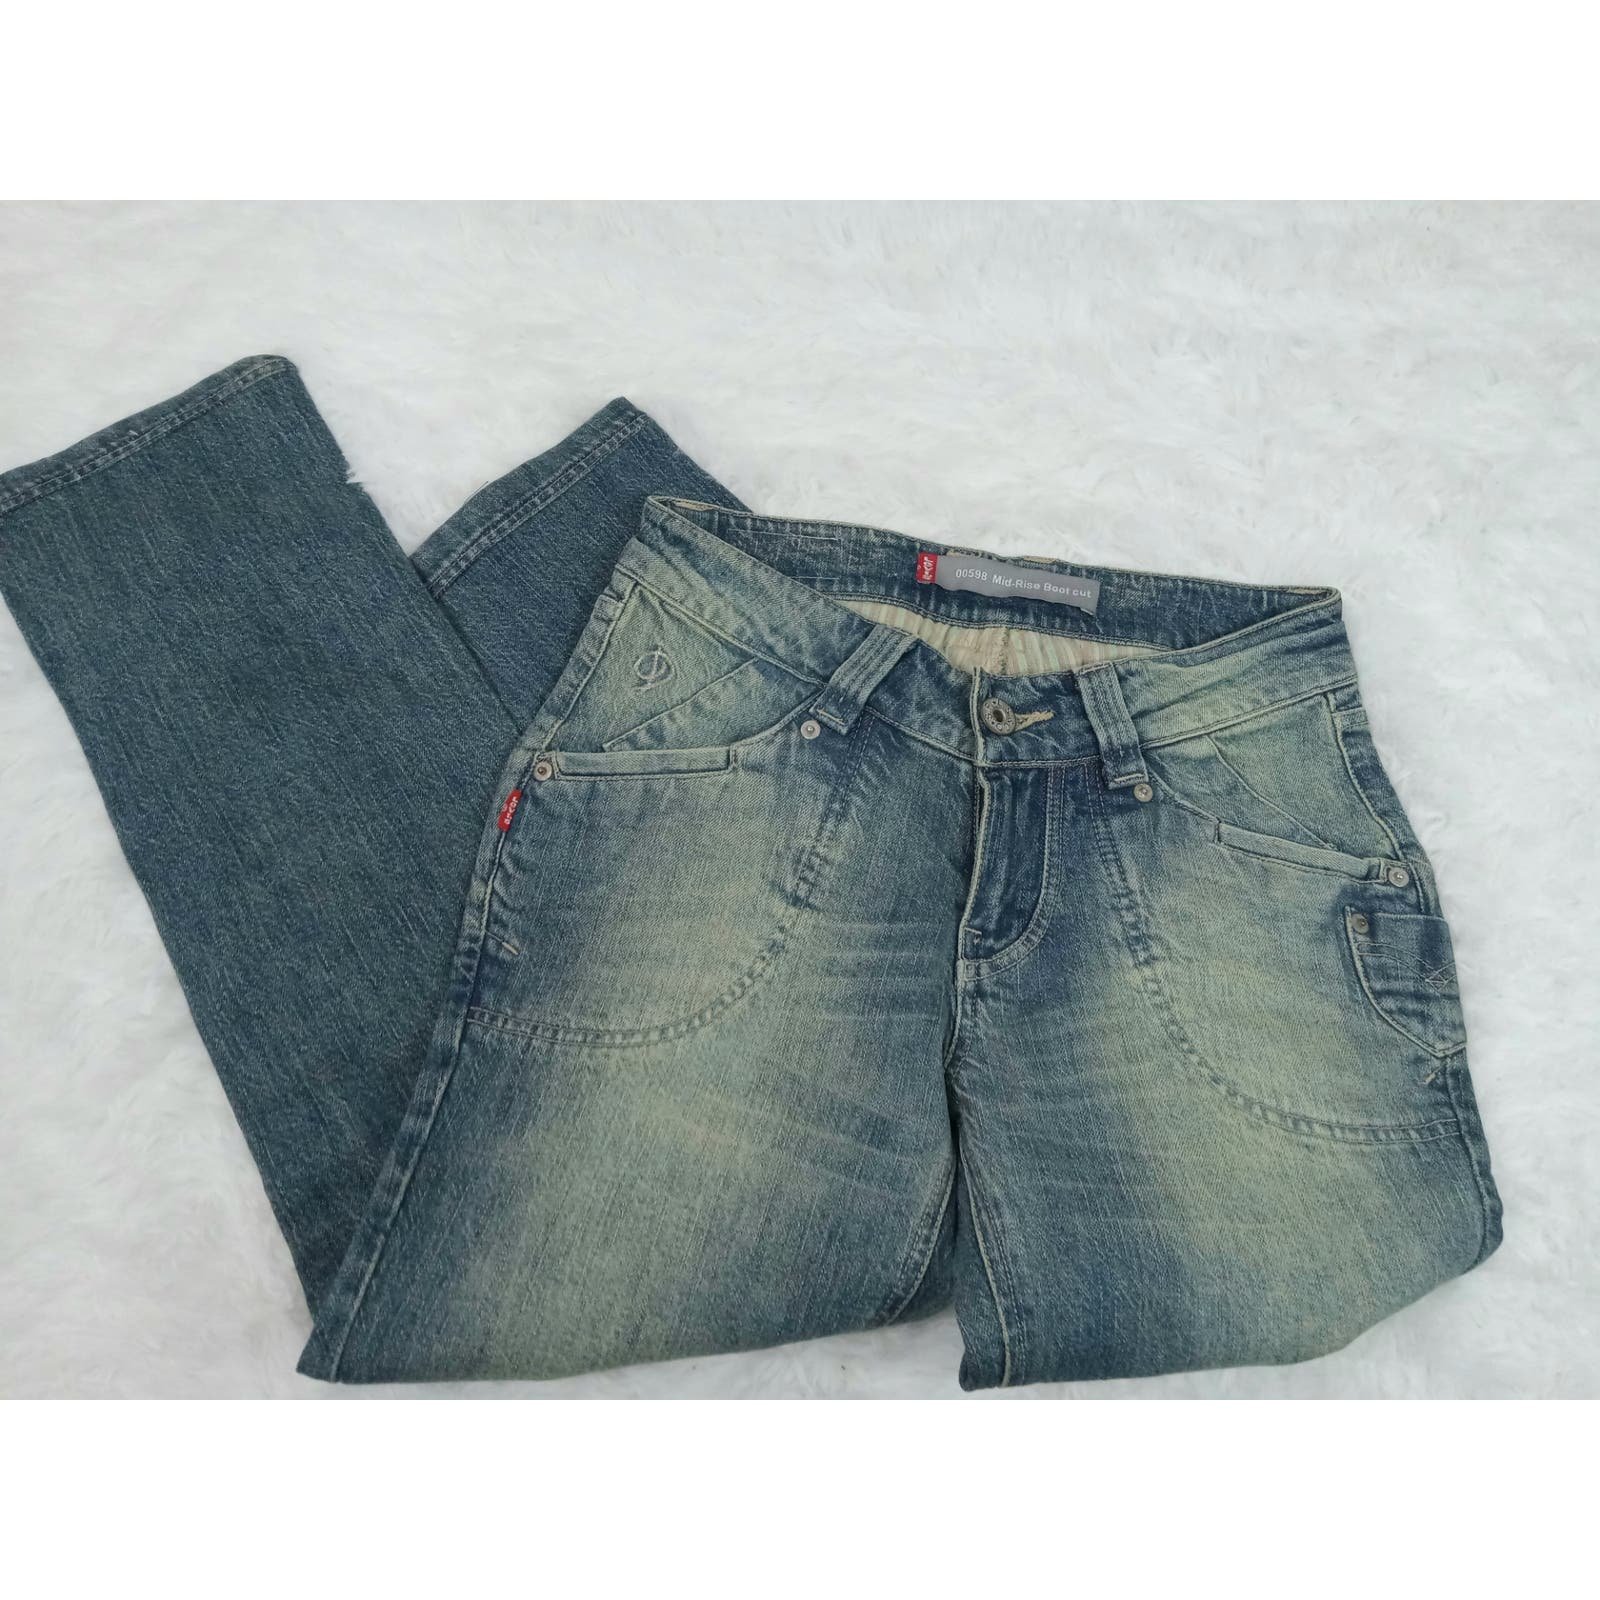 Promotions  Levi´s LADYSTYLE VTG 90´s 598 Low Rise Boot cut Jeans Women´s Size 33 MYUtLD9fs Great